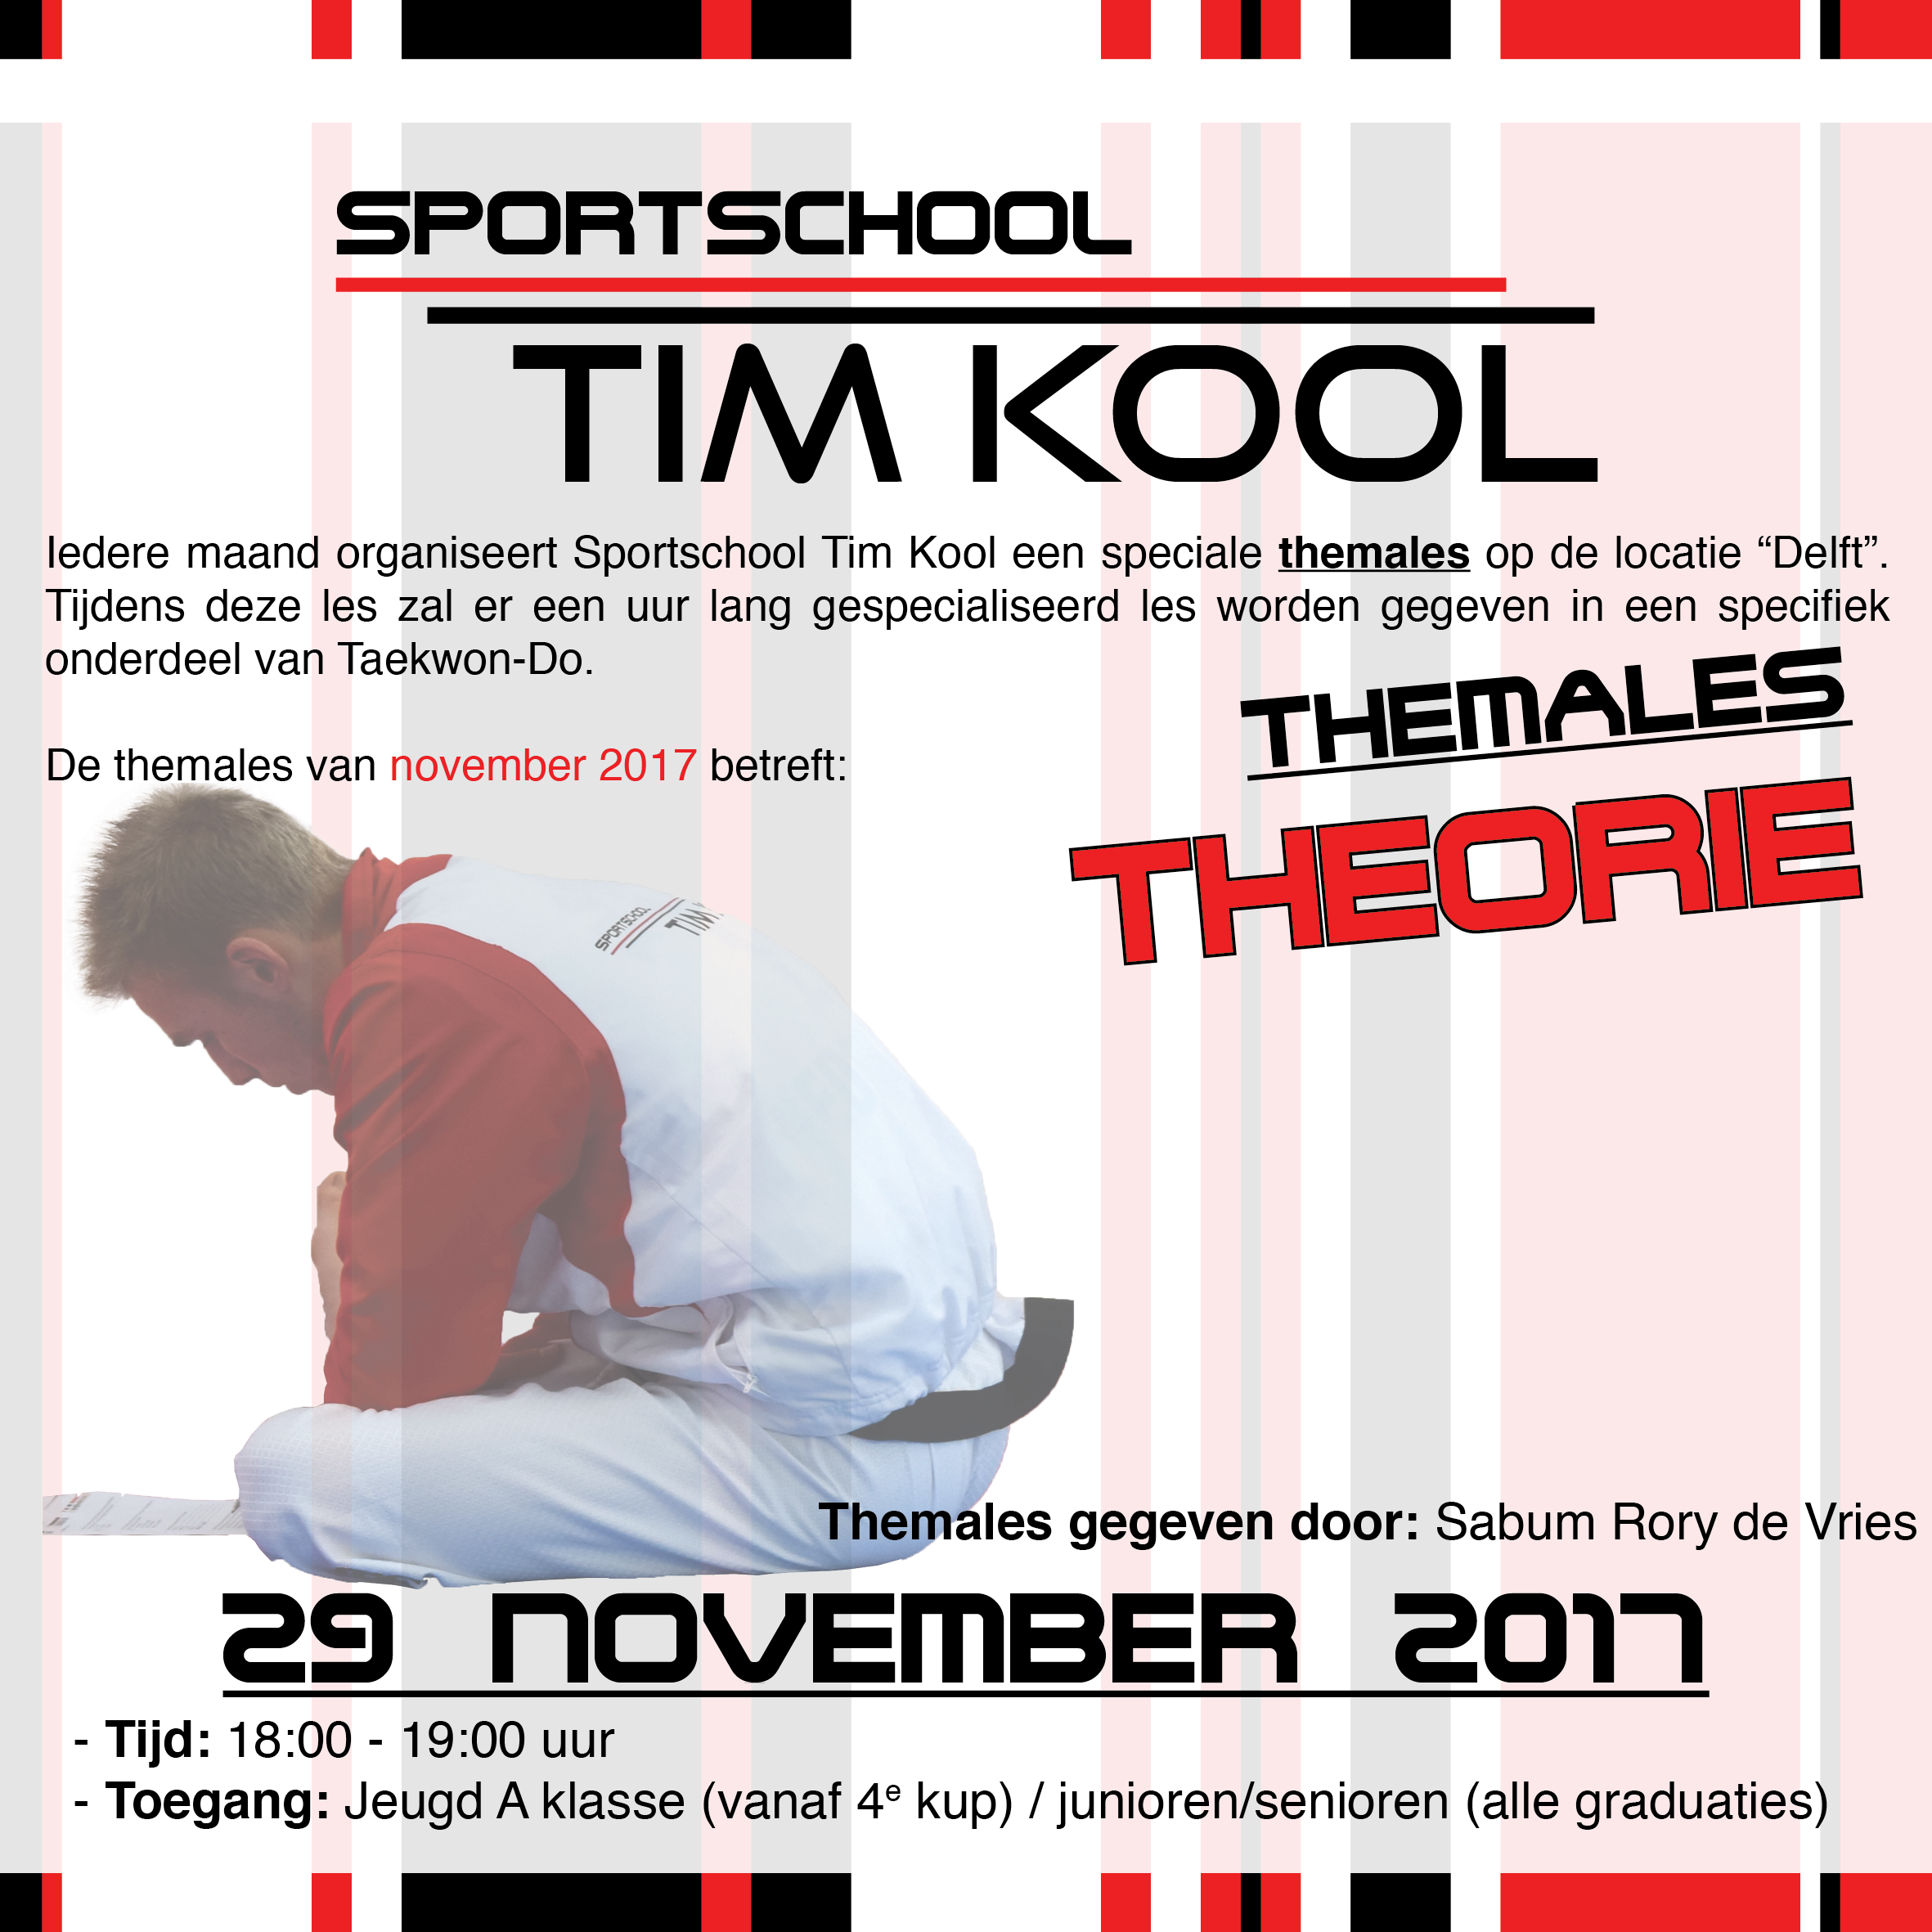 1711 Themales NOVEMBER 2017 THEORIE